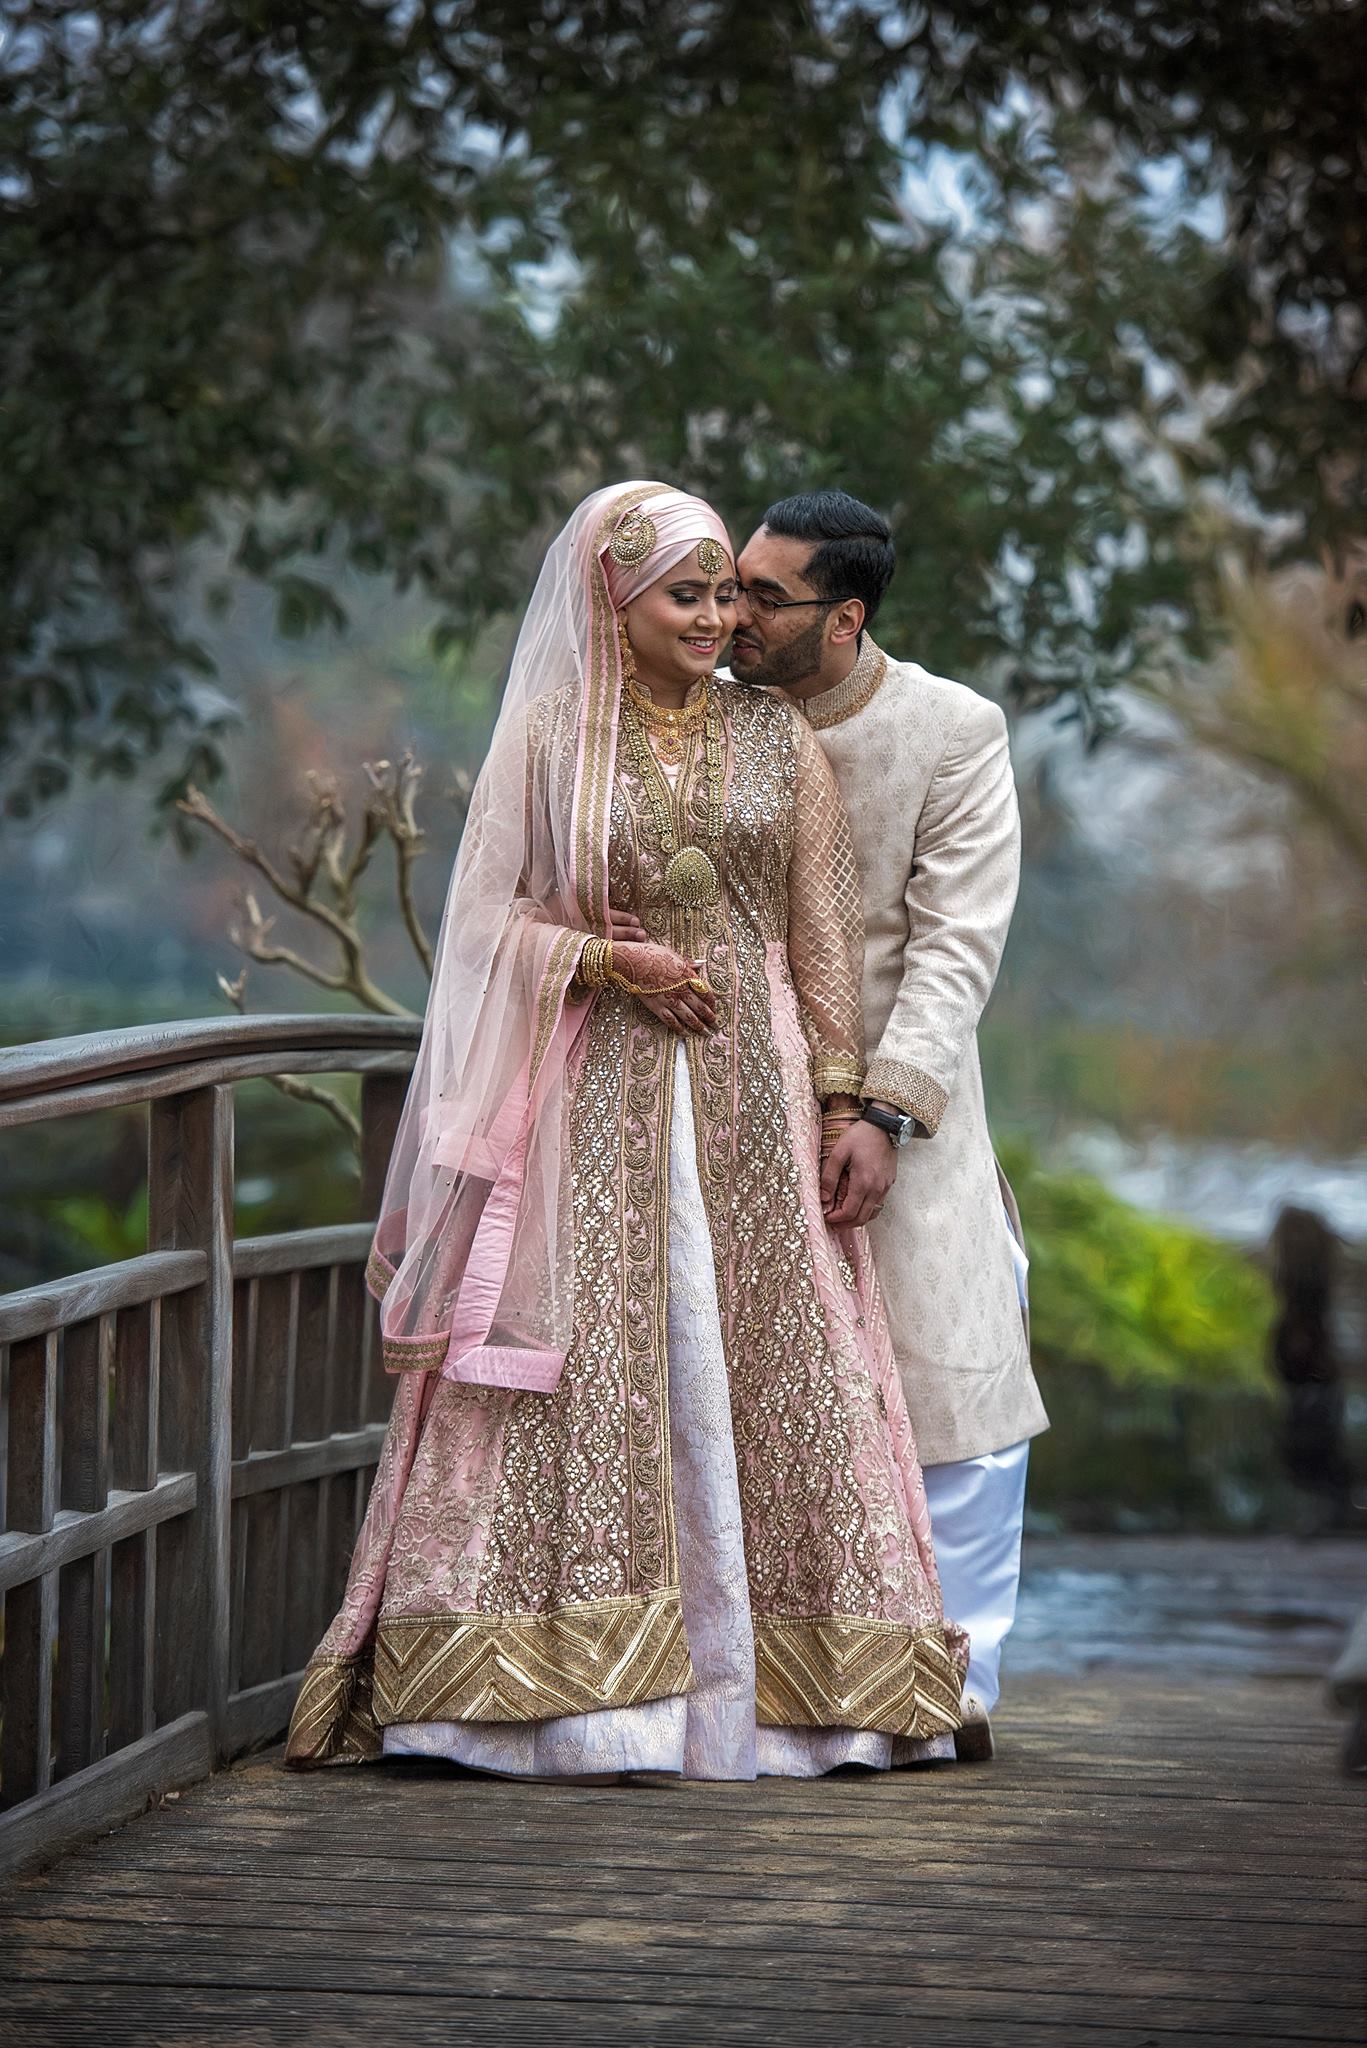 Photo portrait of asian bride and groom, bride wearing a lovely asian wedding dress